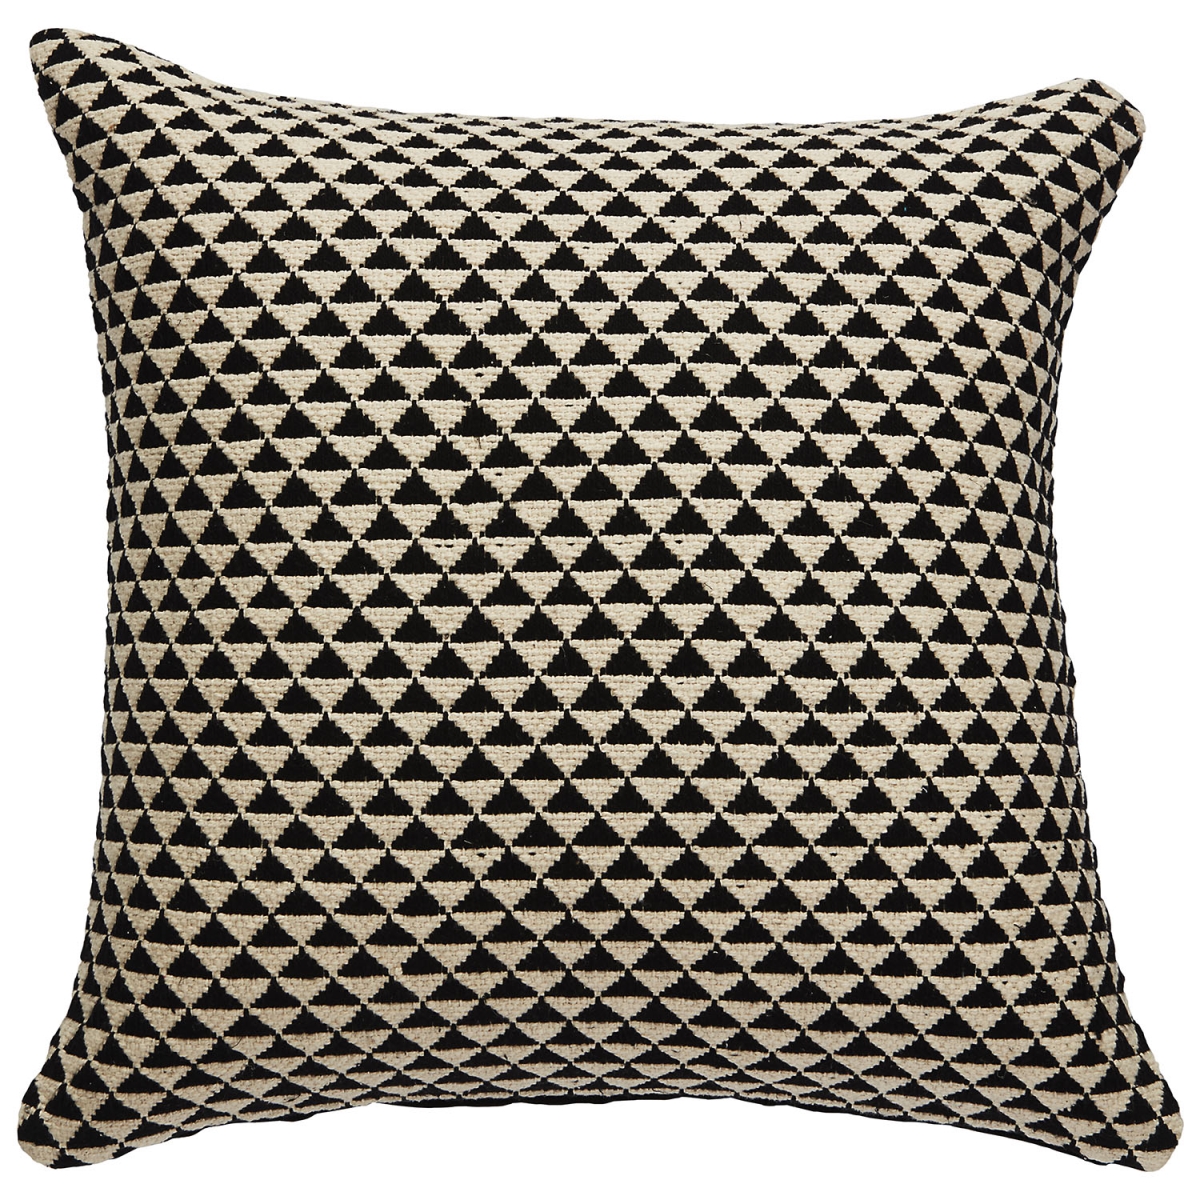 Plw102796 20 X 20 In. National Geographic Home Collection Karoo Black & Ivory Geometric Down Throw Pillow